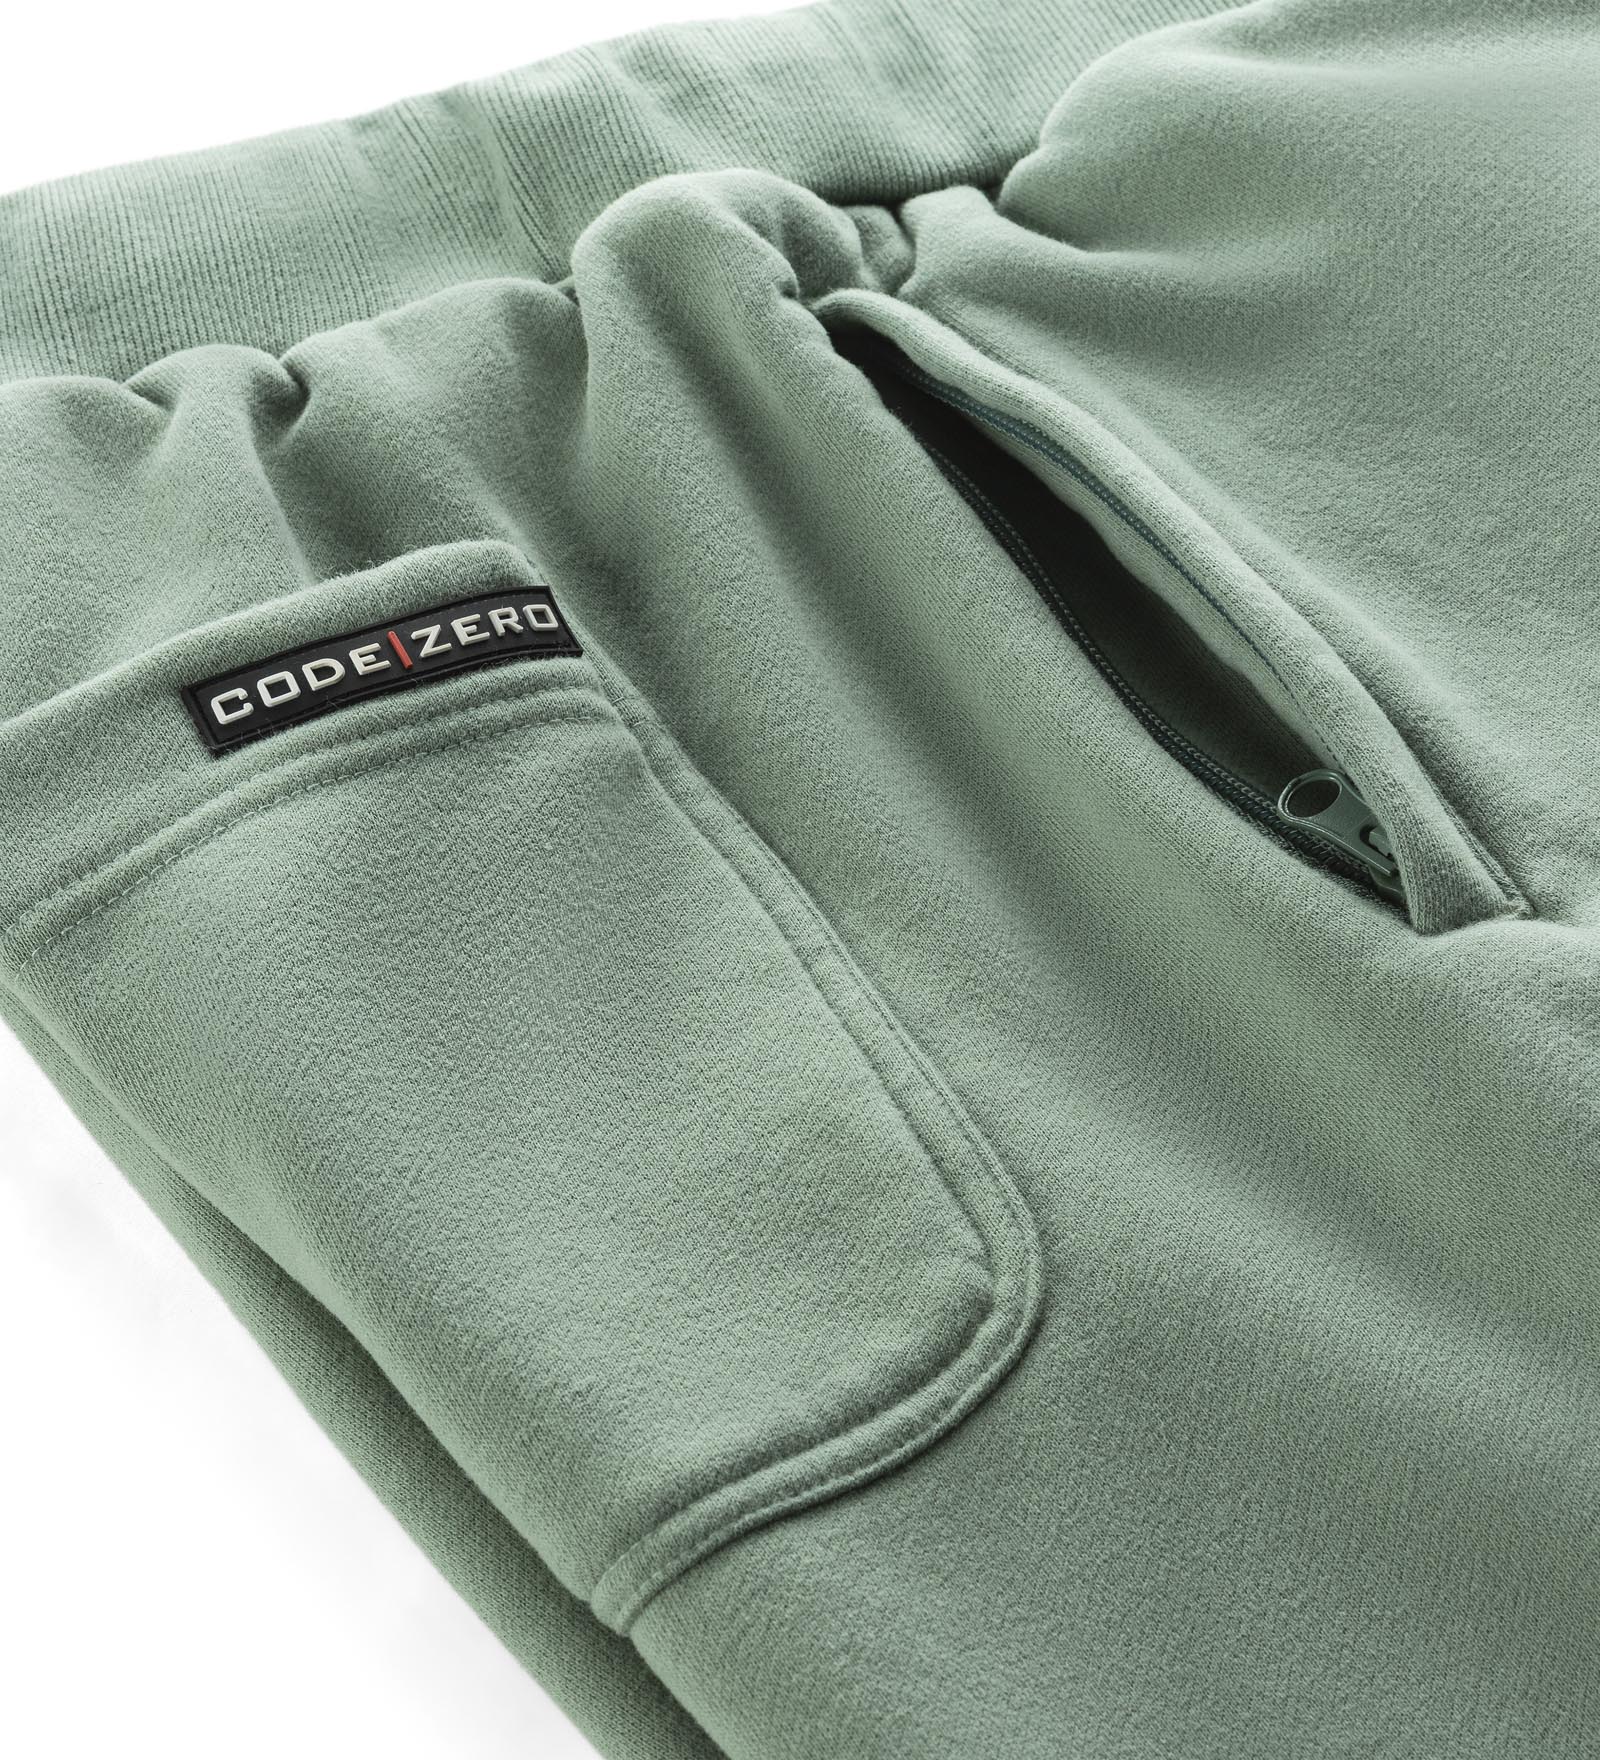 Sweat Pants Green for Men and Women 